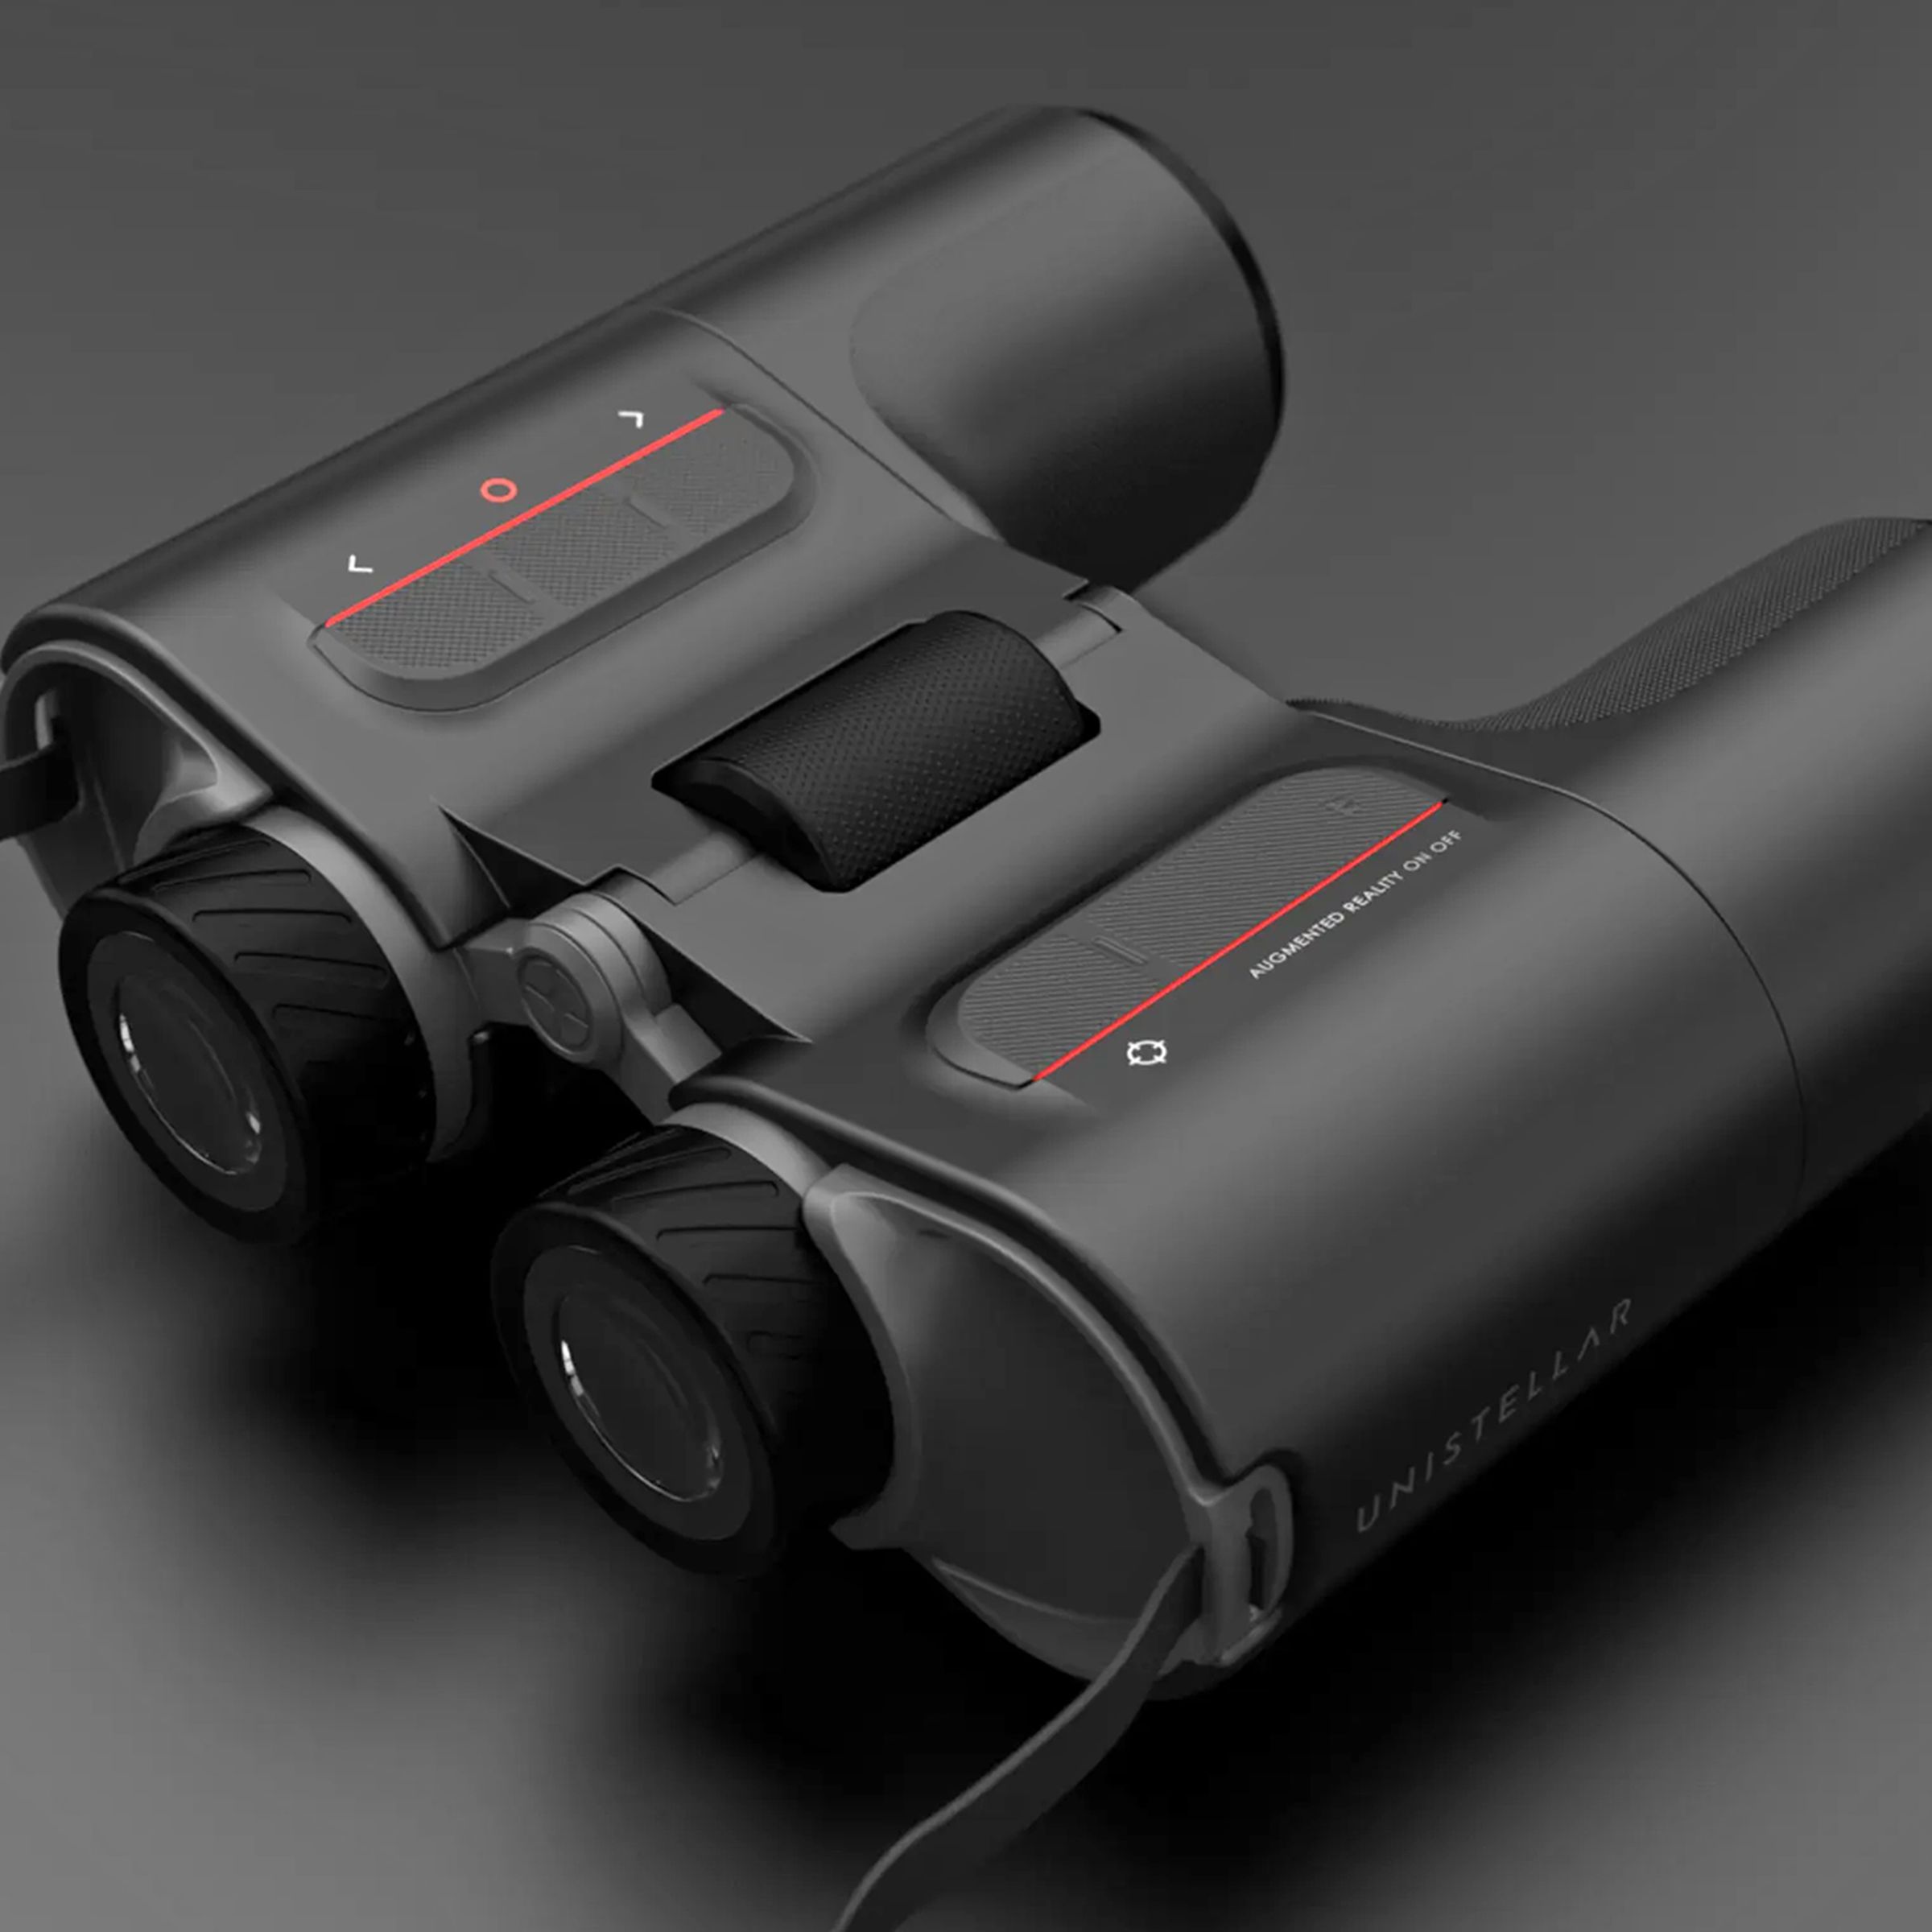 A rendered image of the Unistellar Envision binoculars against a dark background.